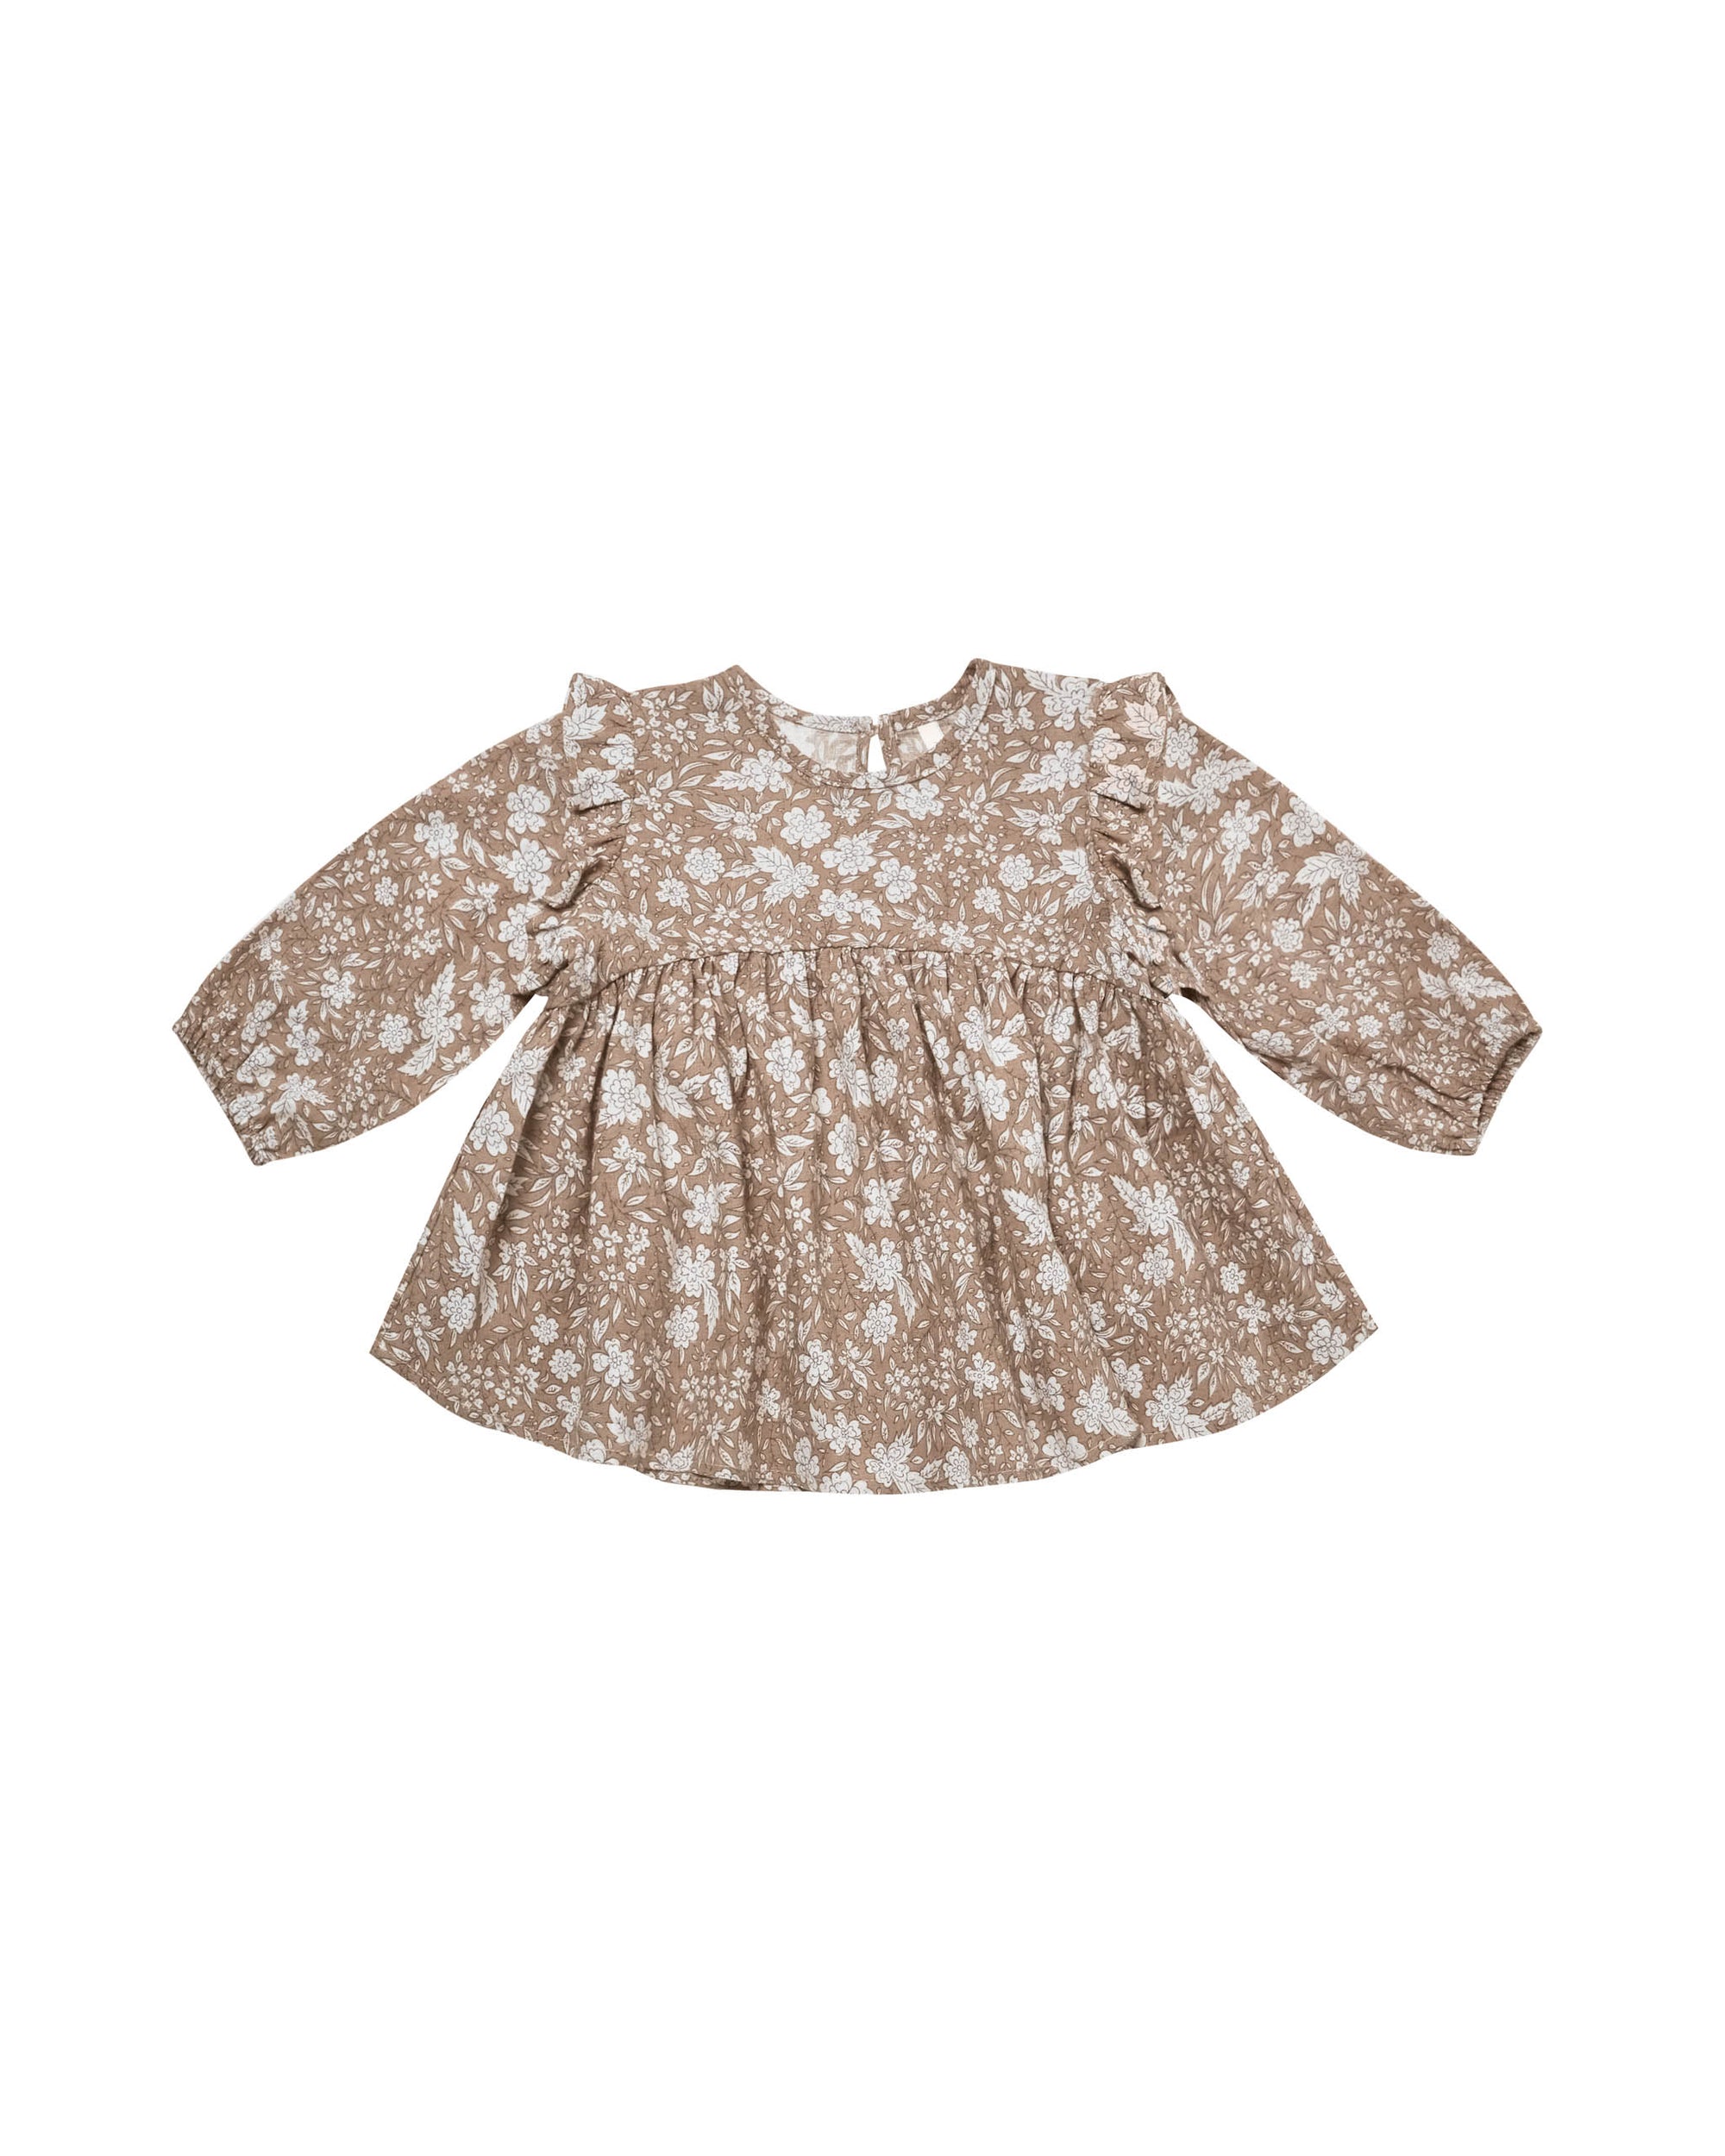 RYLEE + CRU PIPER BLOUSE / SOFT FLORAL